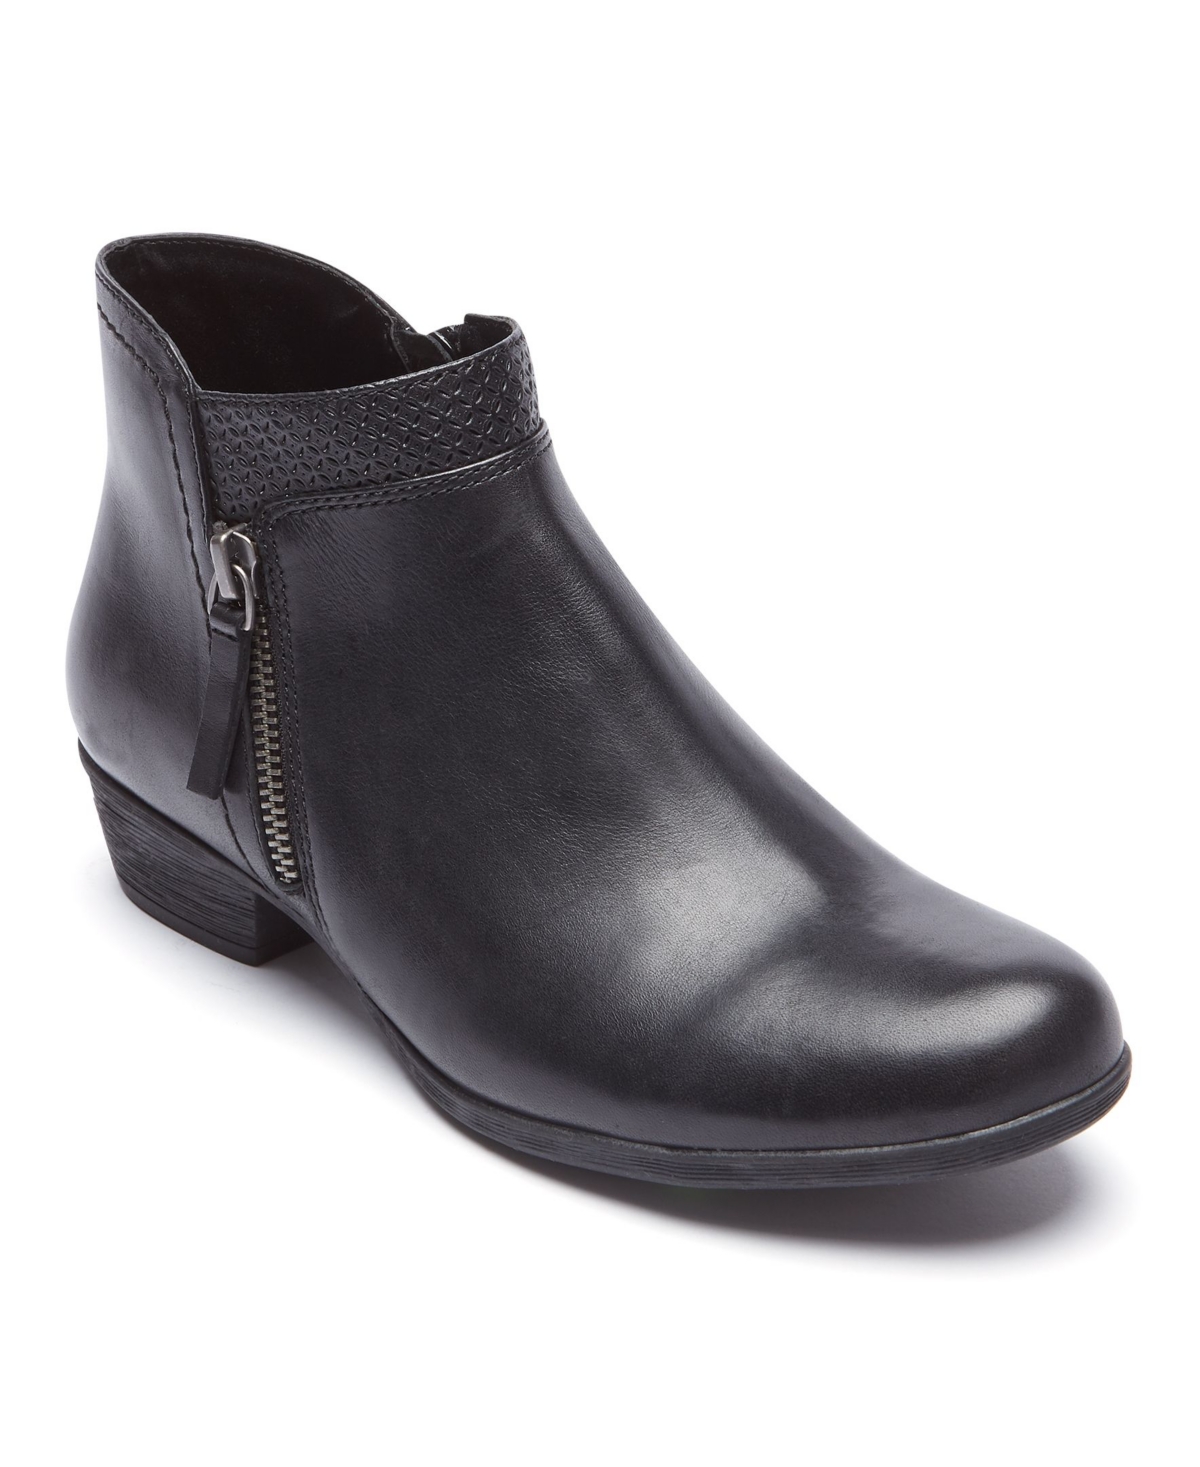 Women's Carly Leather Bootie - Black